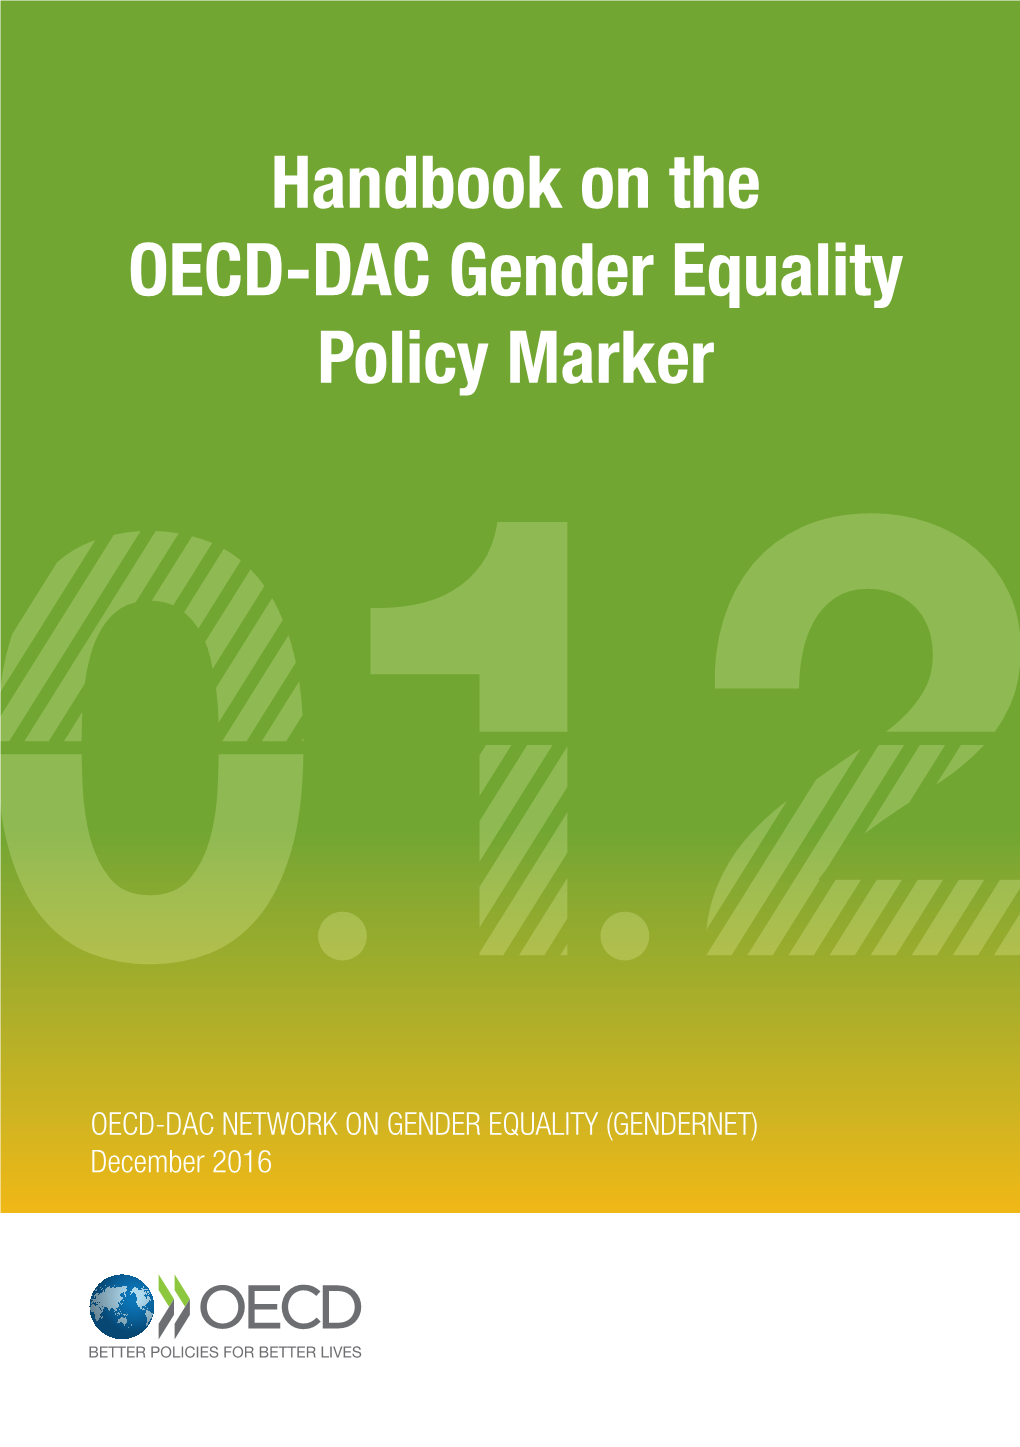 Handbook on the OECD-DAC Gender Equality Policy Marker